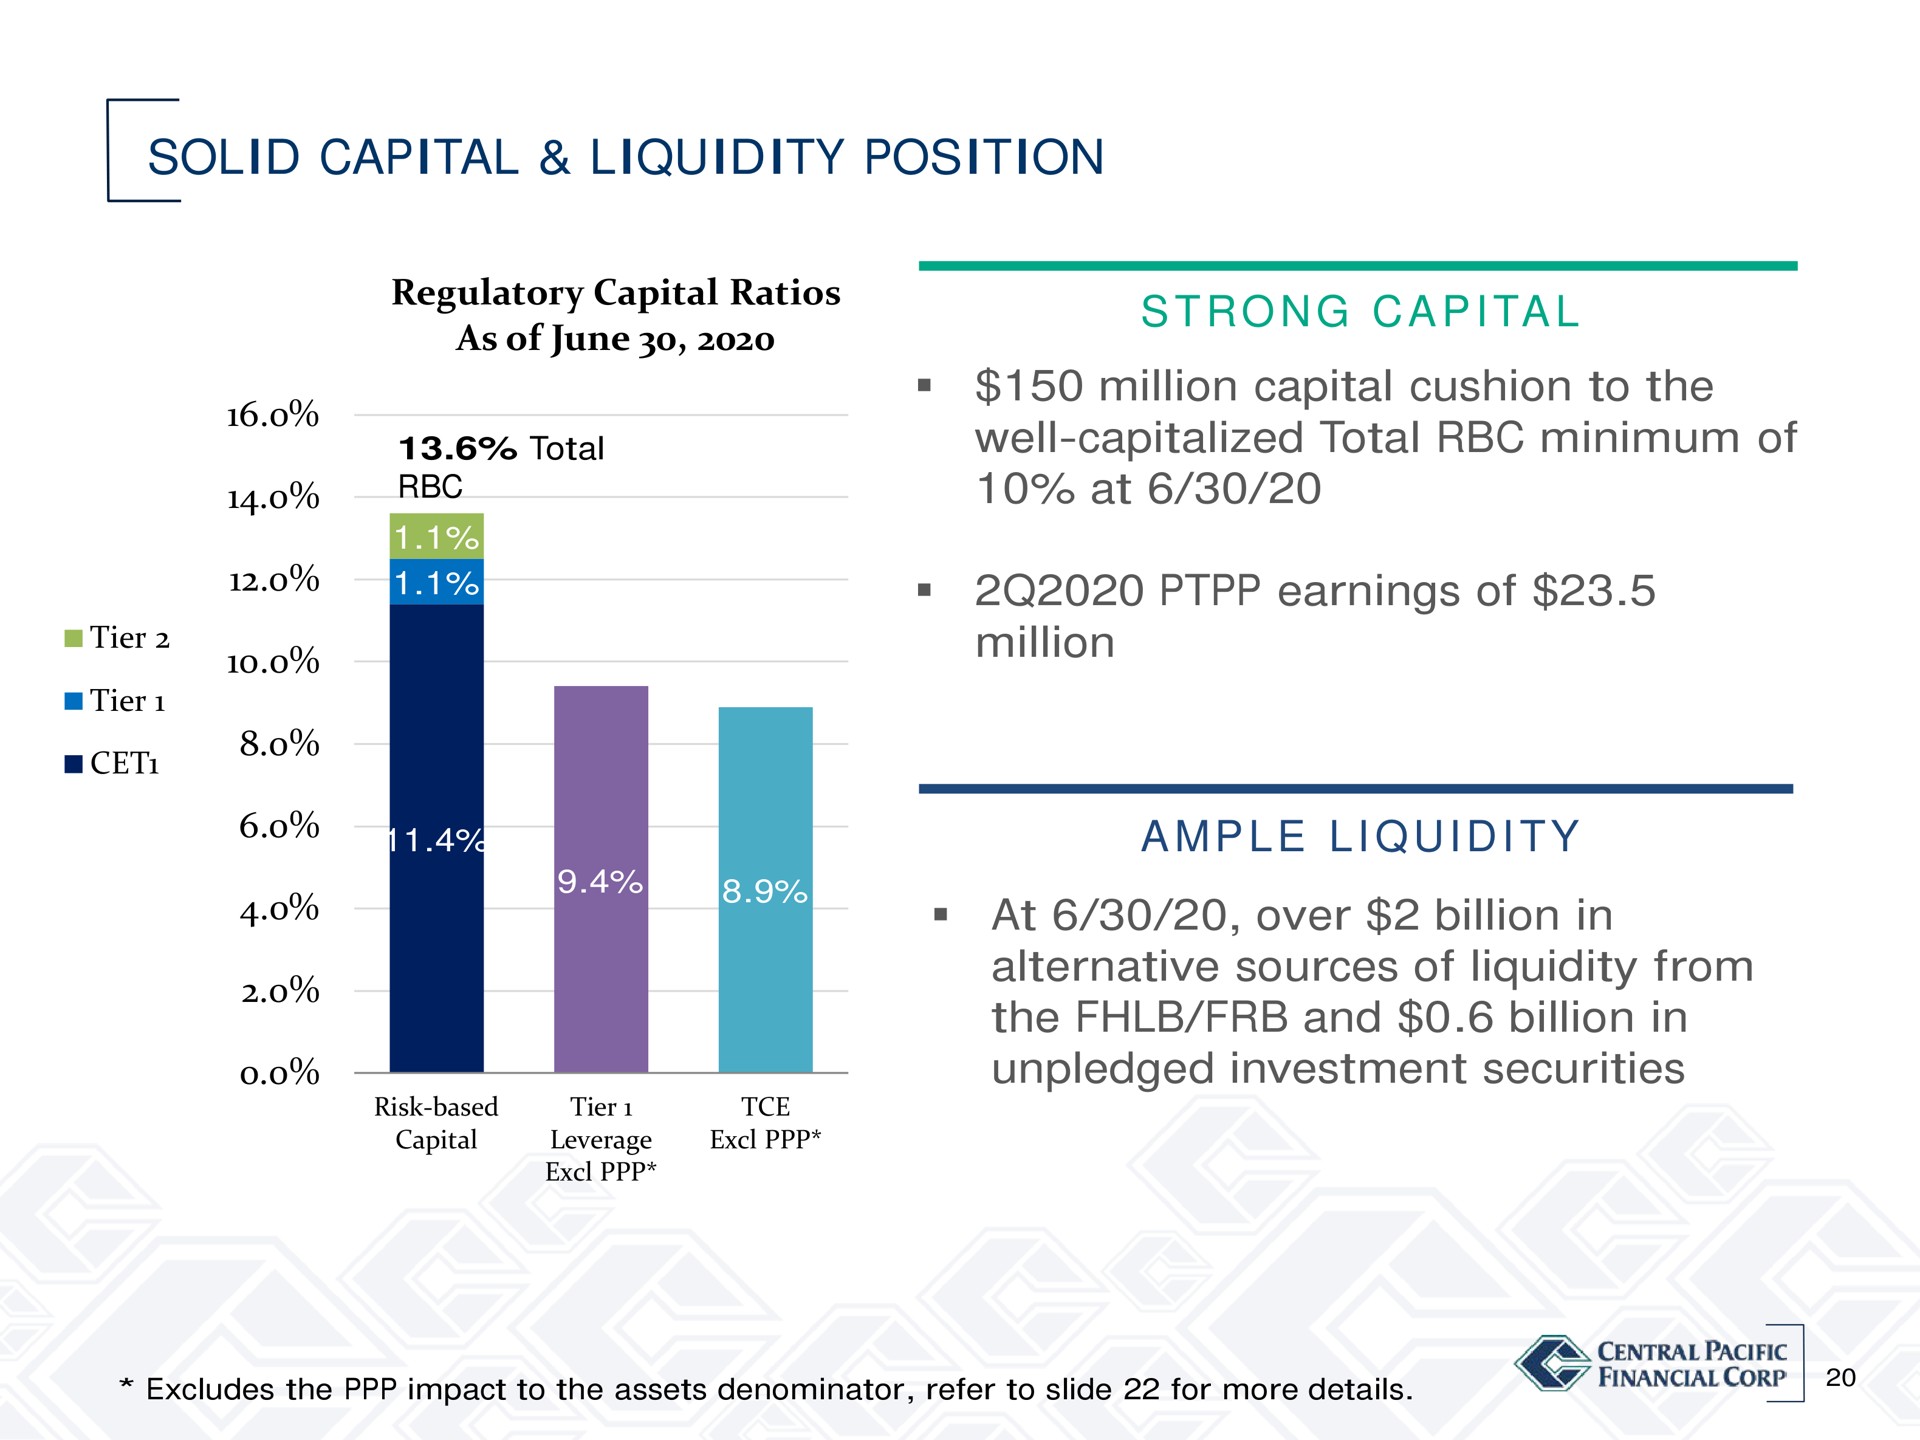 solid capital liquidity position a i million capital cushion to the well capitalized total minimum of at earnings of million a i i i at over billion in alternative sources of liquidity from the and billion in unpledged investment securities ample | Central Pacific Financial